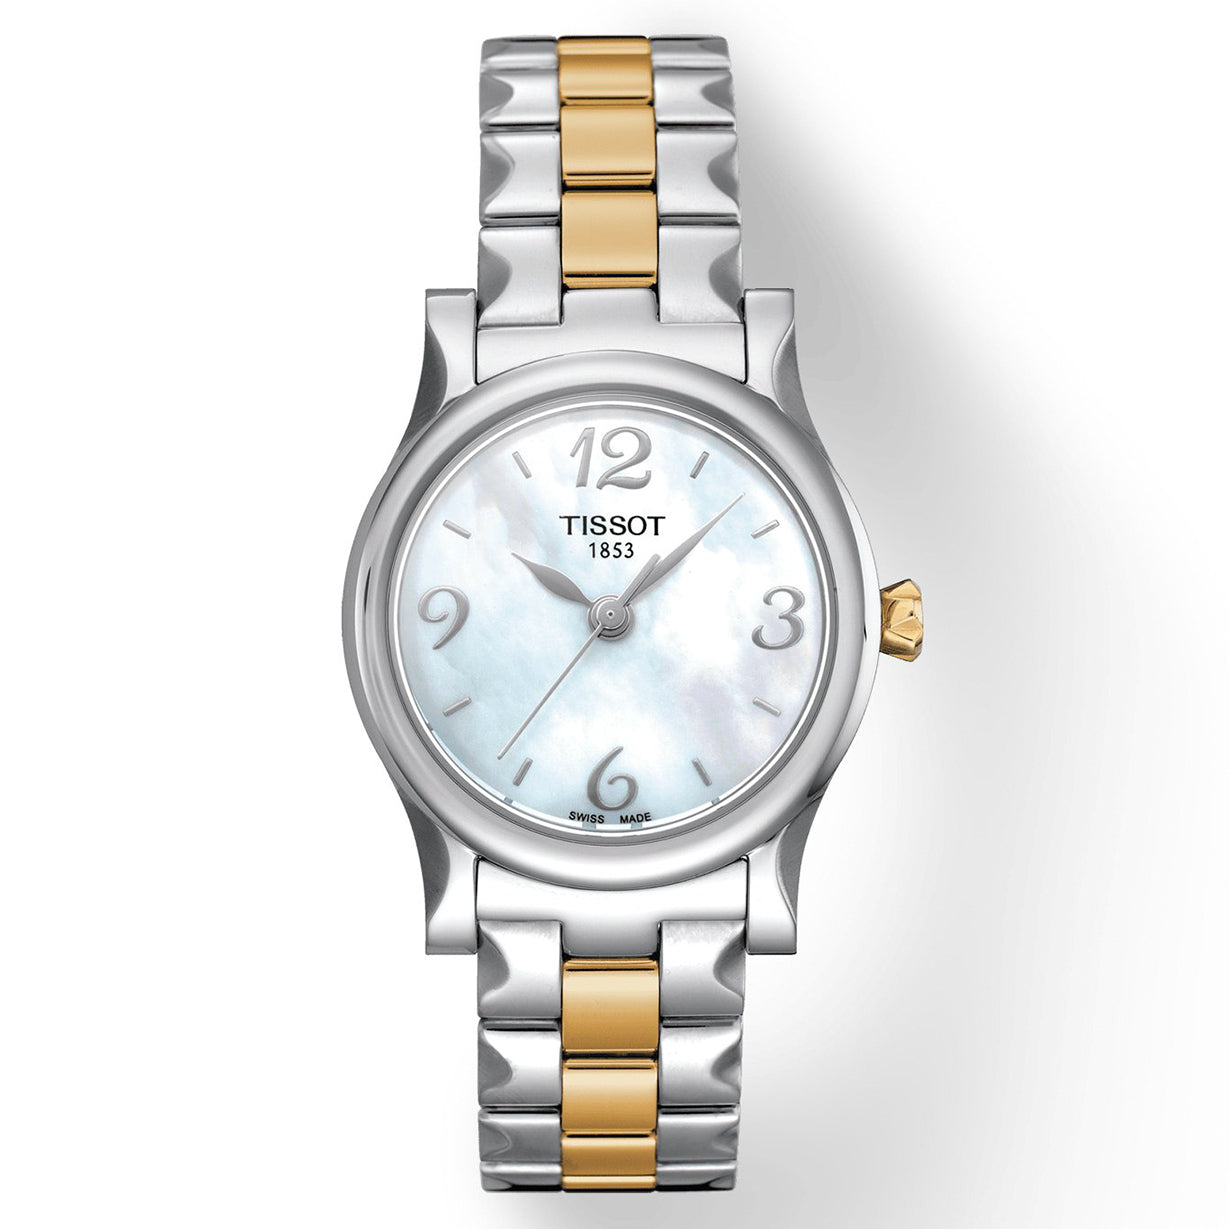 Tissot T-Classic White Mother-Of-Pearl Dial Women 28mm